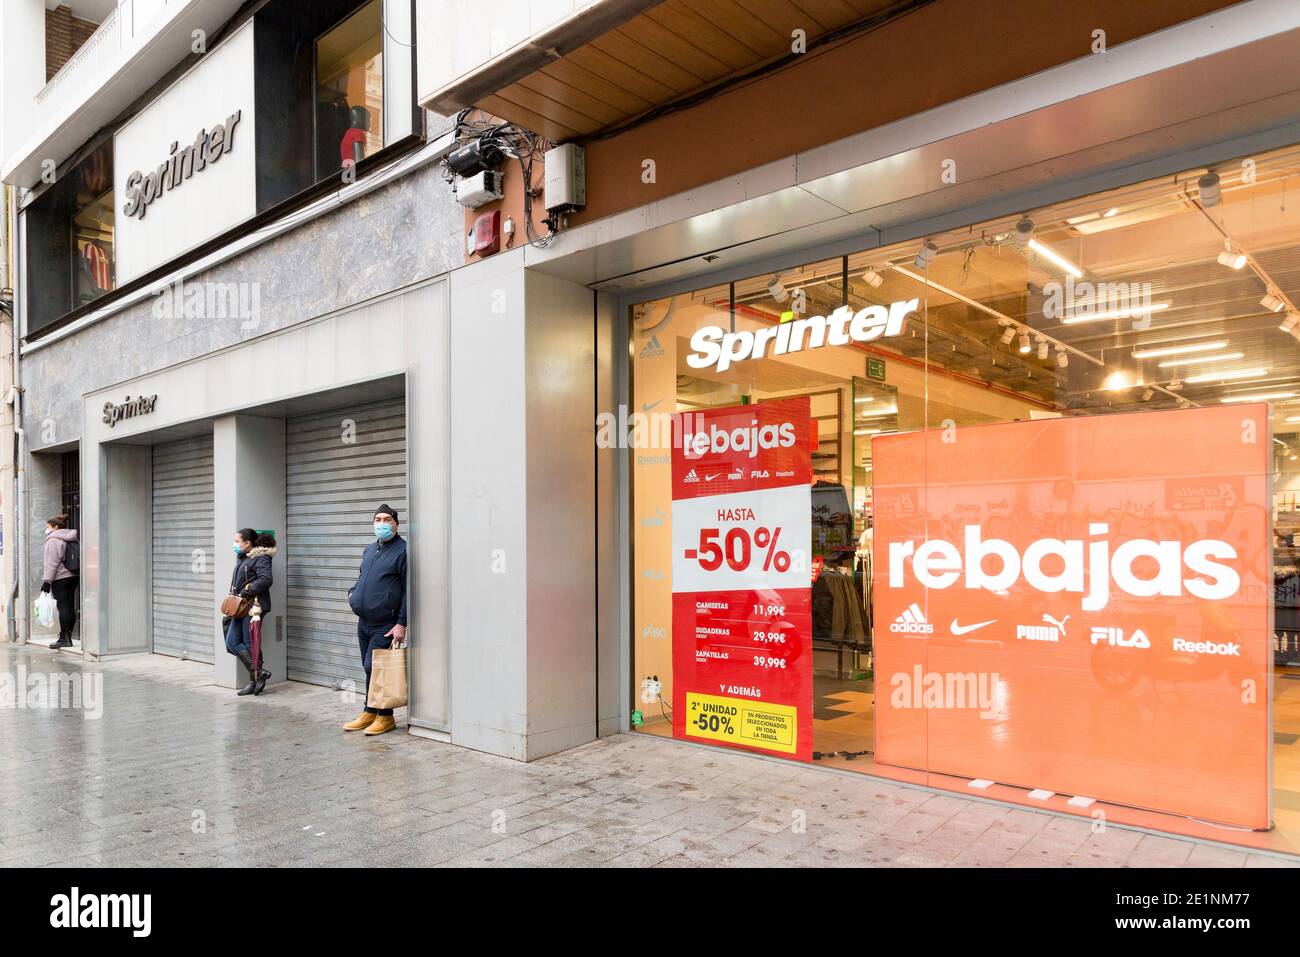 People wait in front of the Sprinter store during the winter sales.In the  last weeks of Christmas, the cases of Covid19 in Valencia have increased,  this has caused the winter sales to